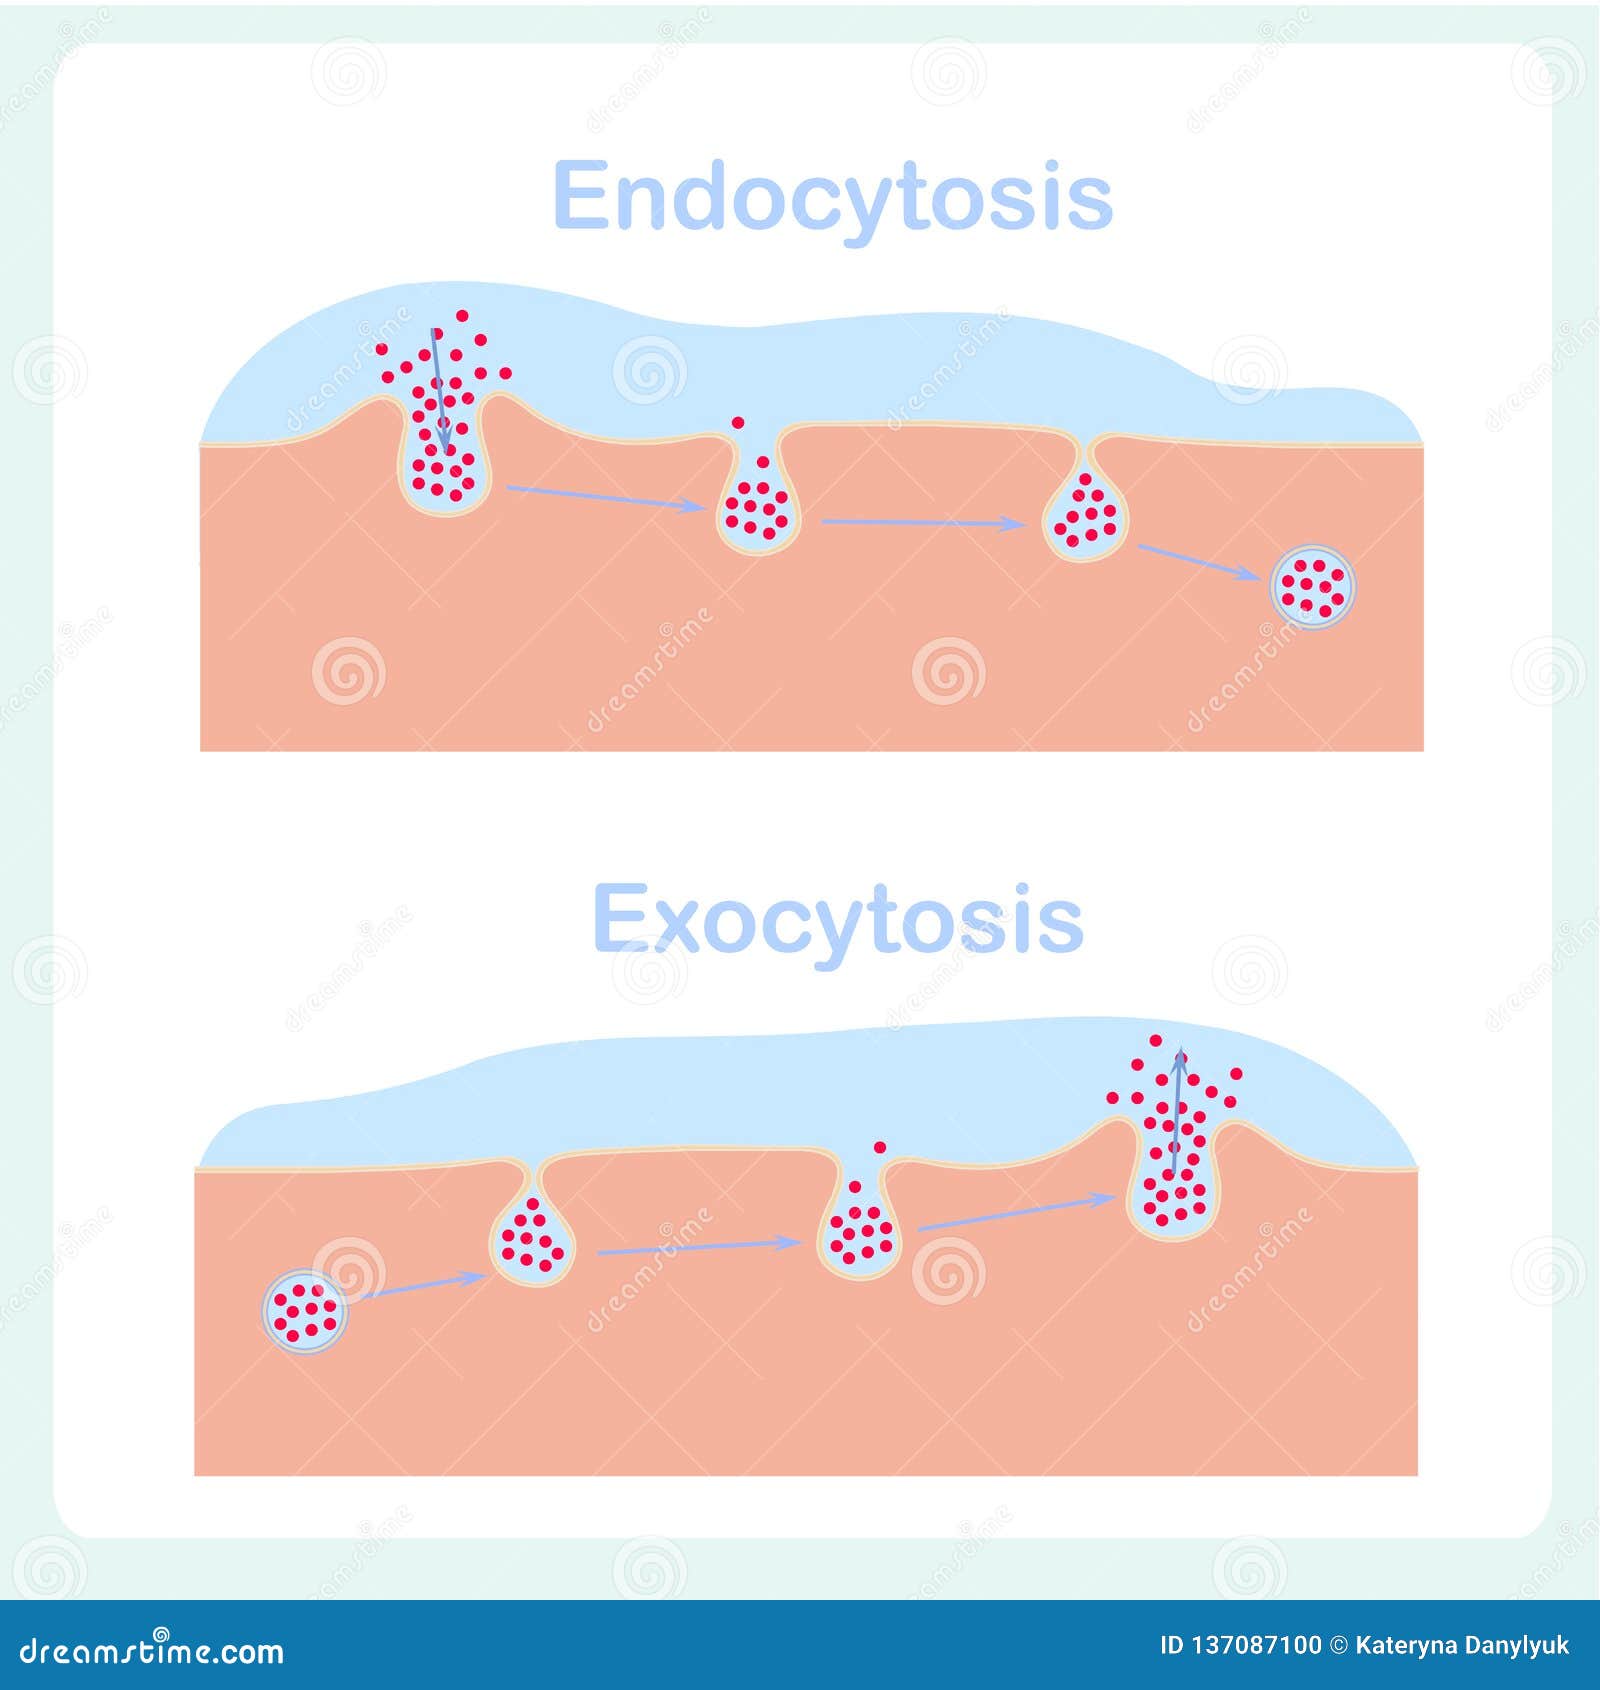 endocytosis, exocytosis diagrams. cell transports proteins into,, from cell, scheme